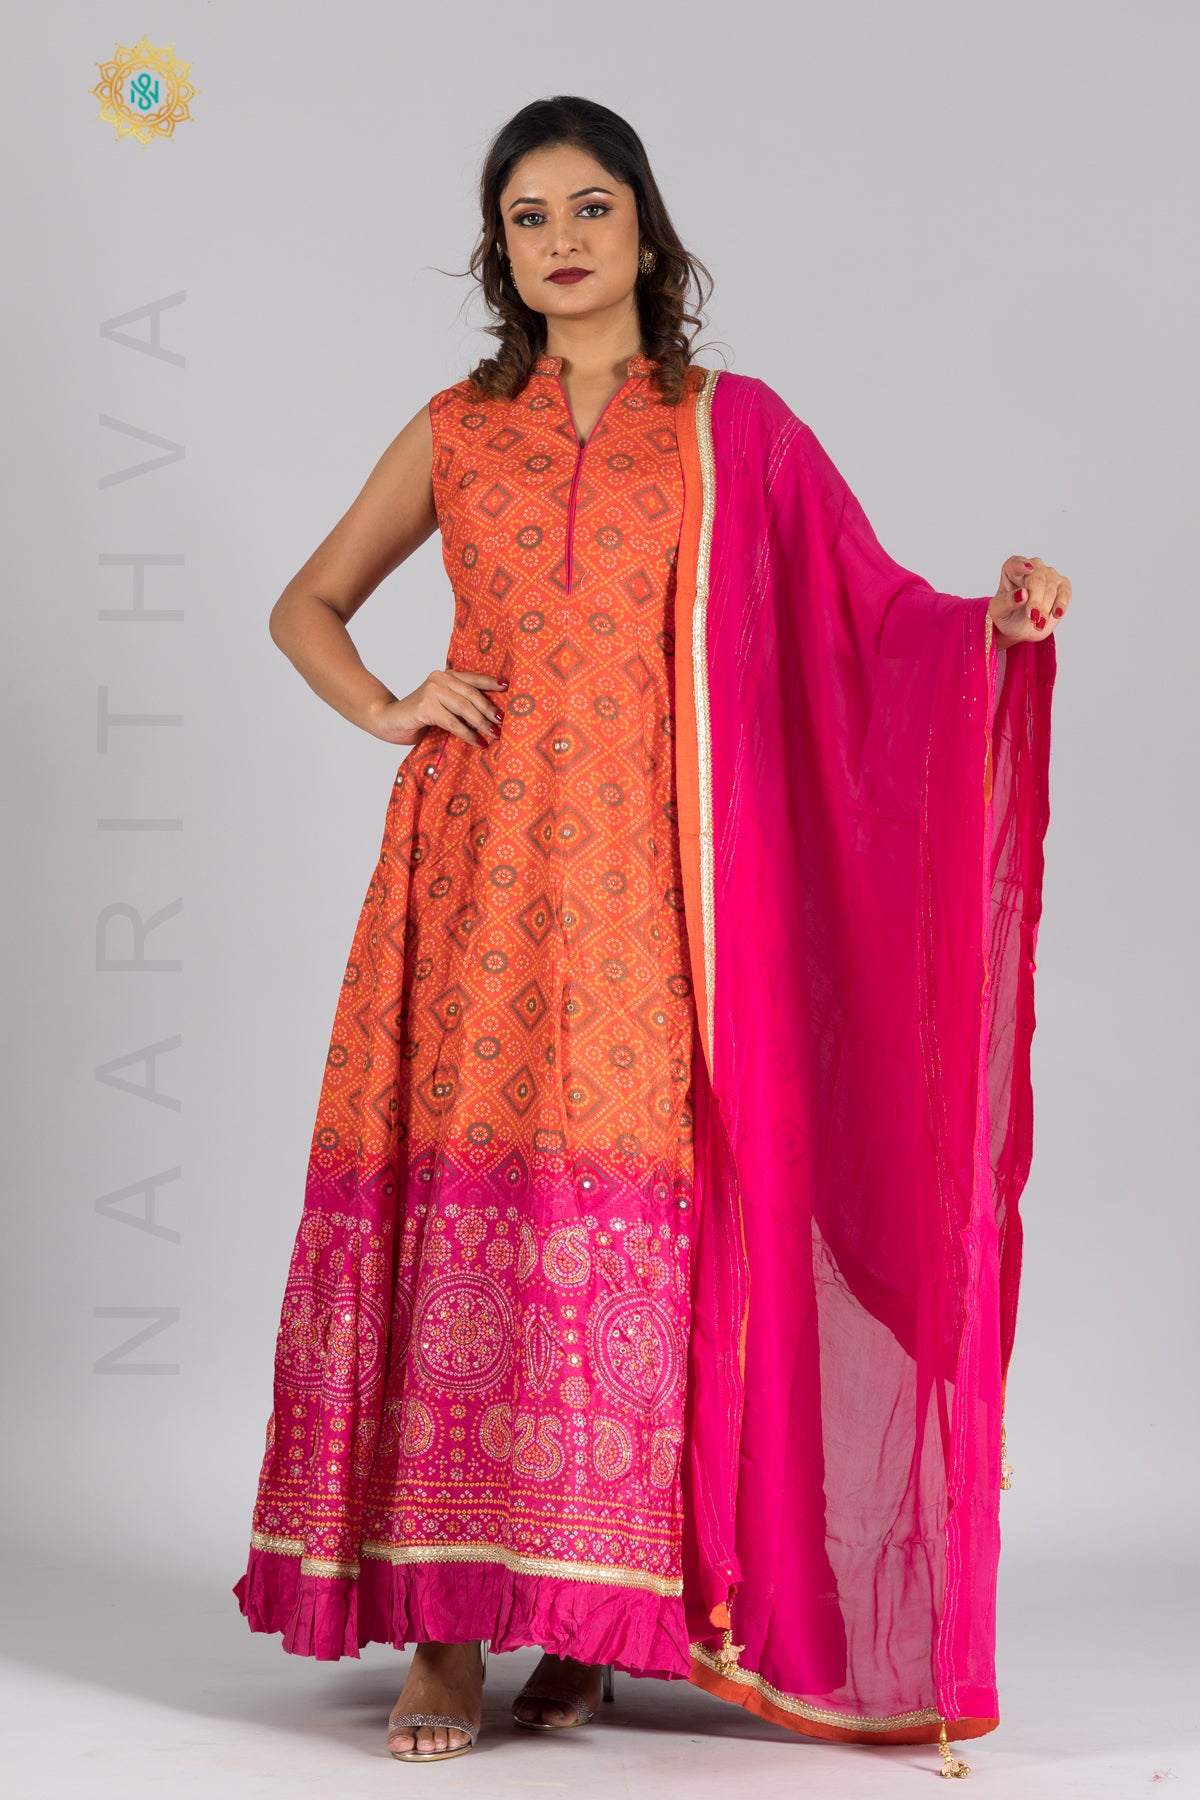 ORANGE & PINK - PARTY WEAR GOWN WITH NECK EMBROIDERY & DUPATTA